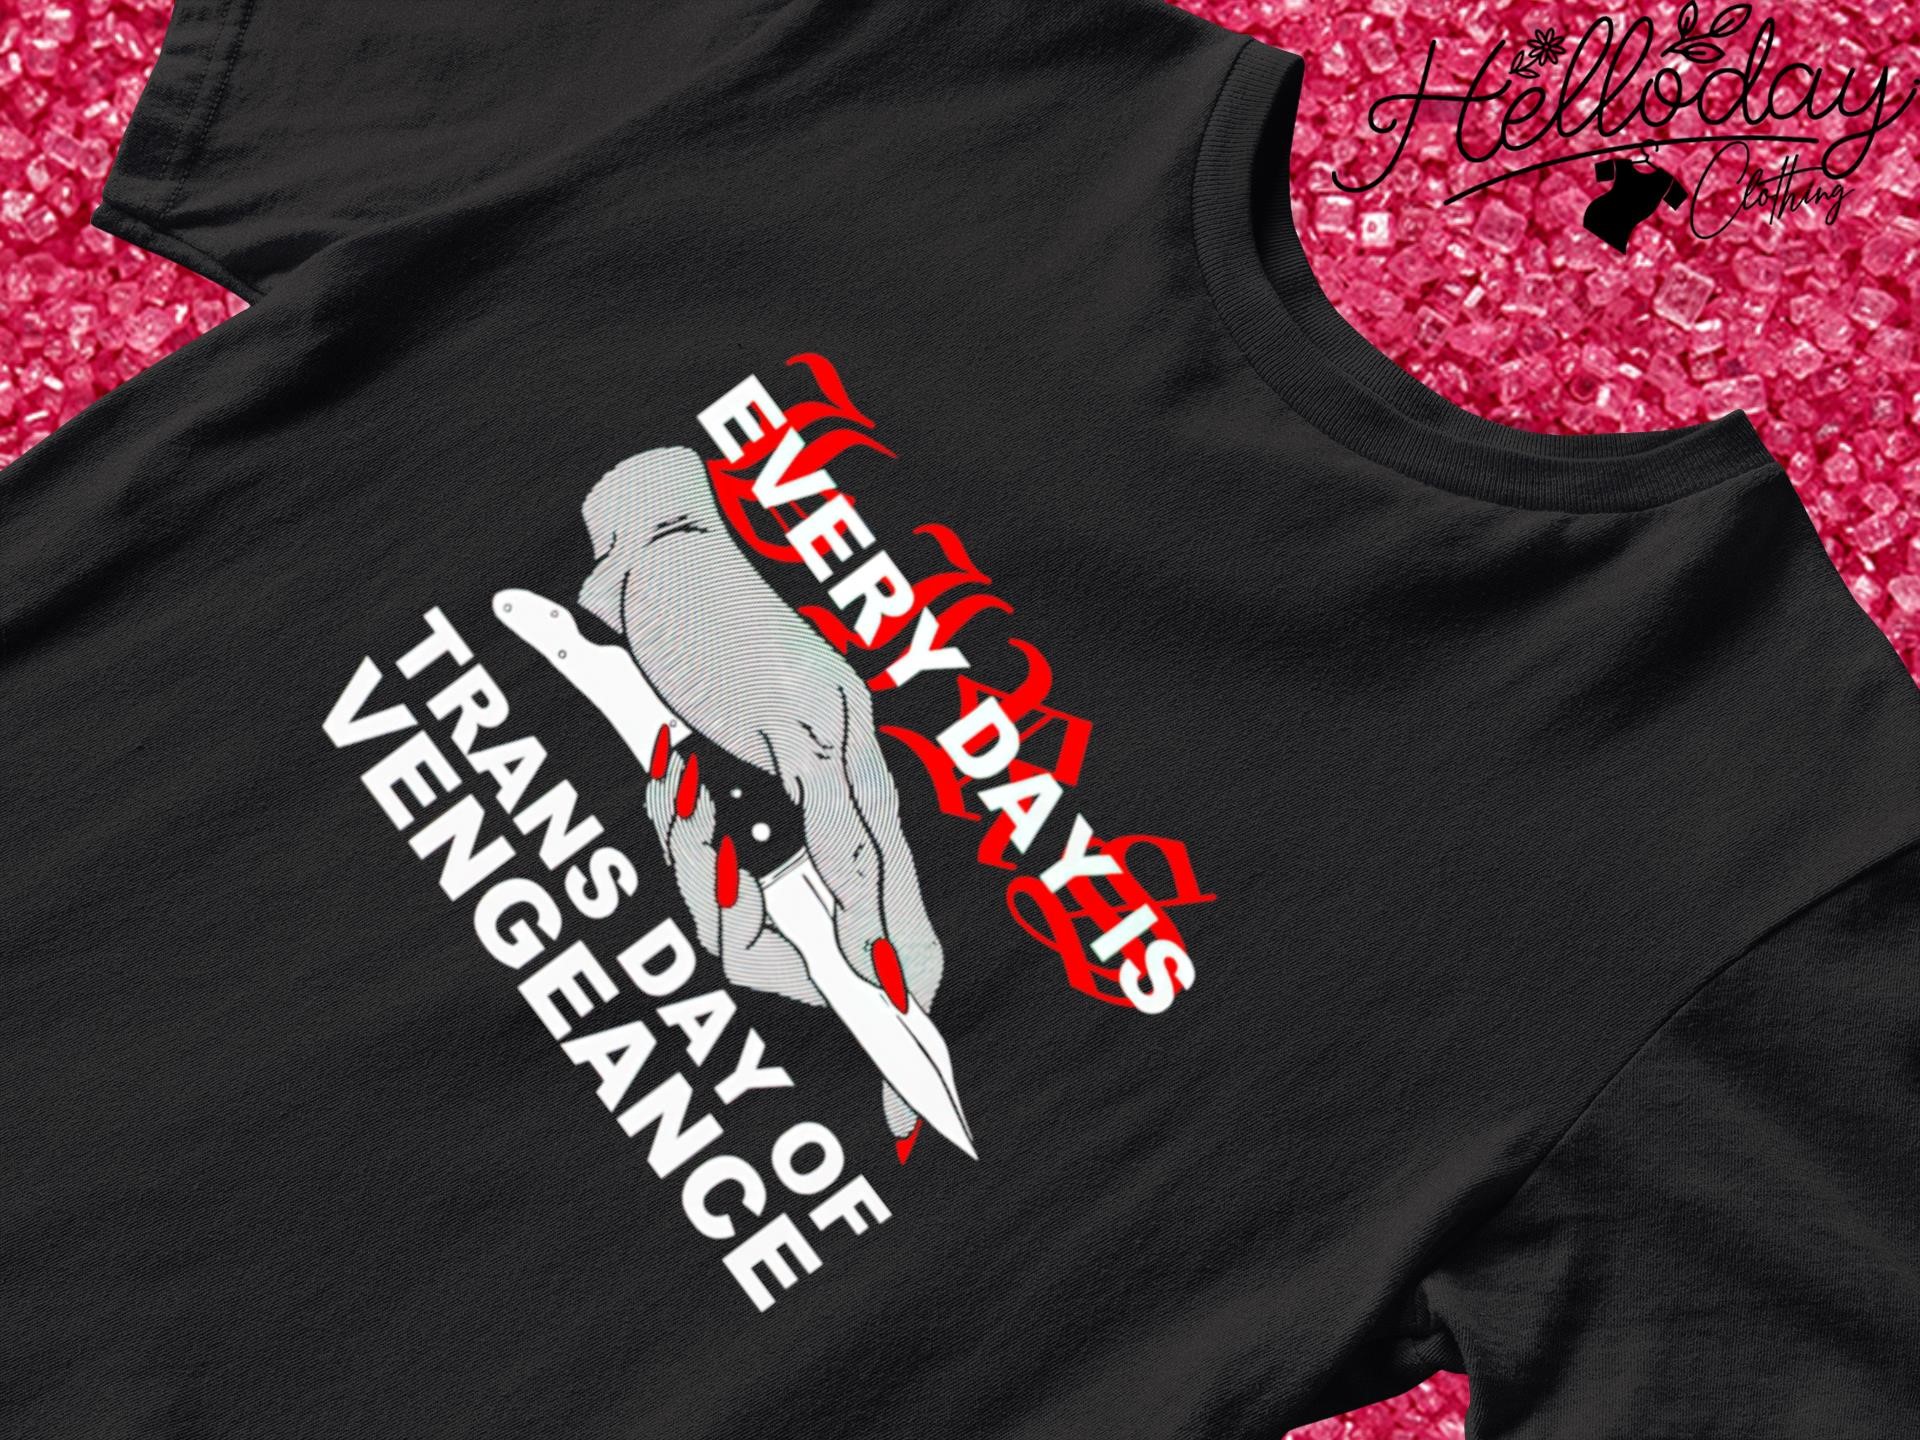 Every day is trans day of vengeance shirt